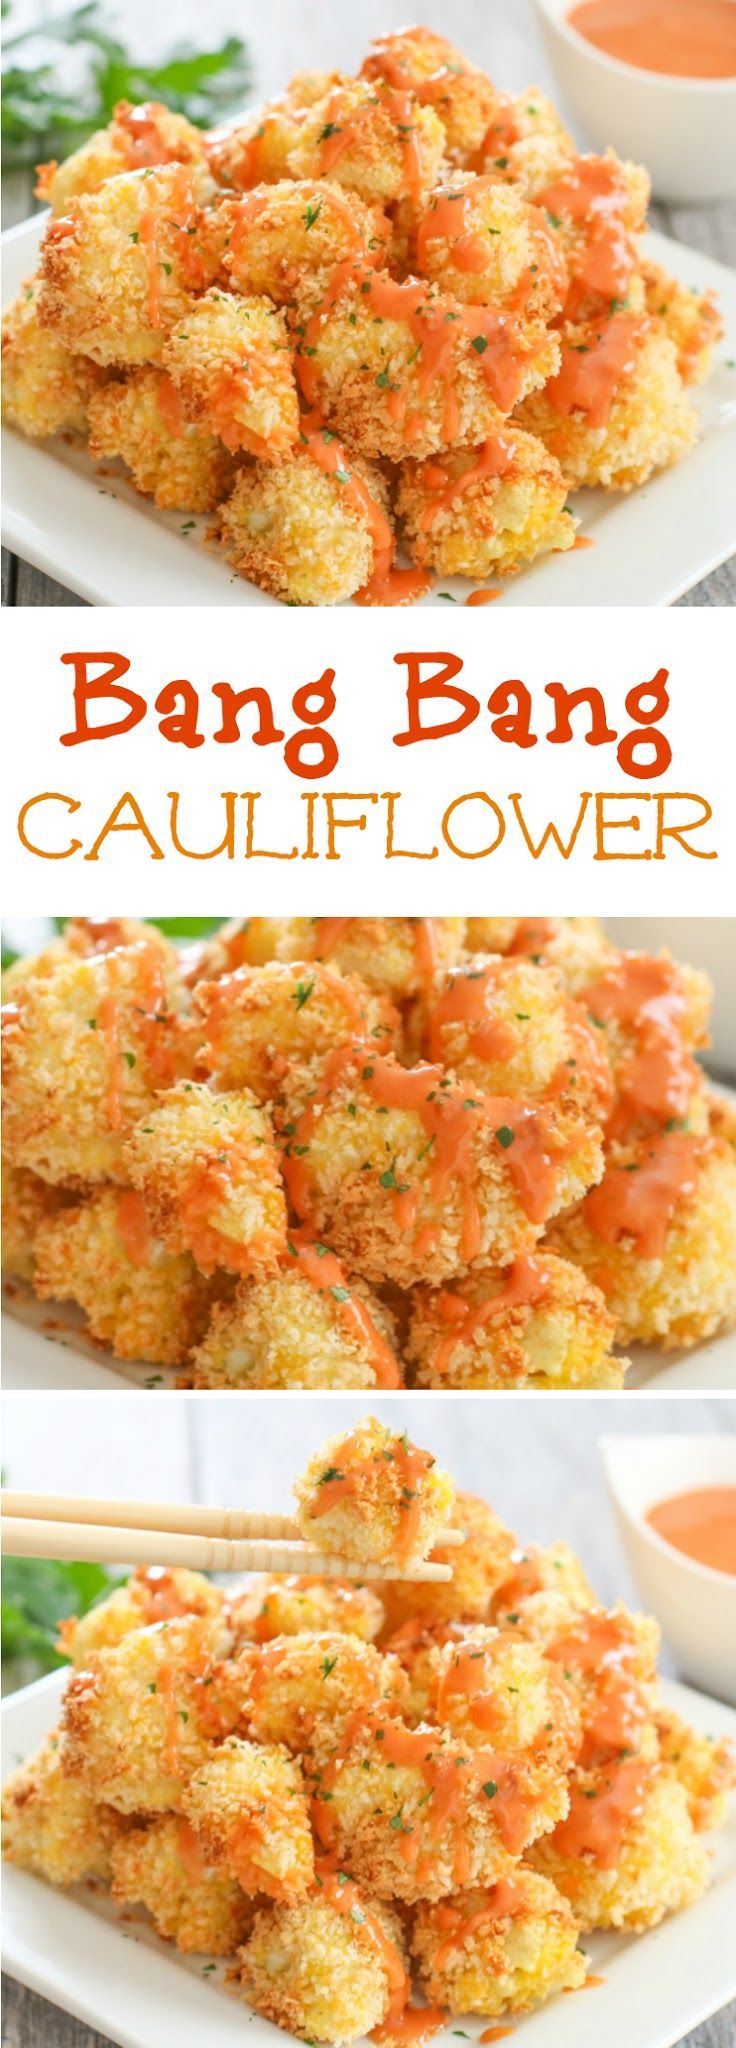 Bang Bang Cauliflower. This sauce is so addicting and easy! The cauliflower is dredged in panko crumbs and baked.